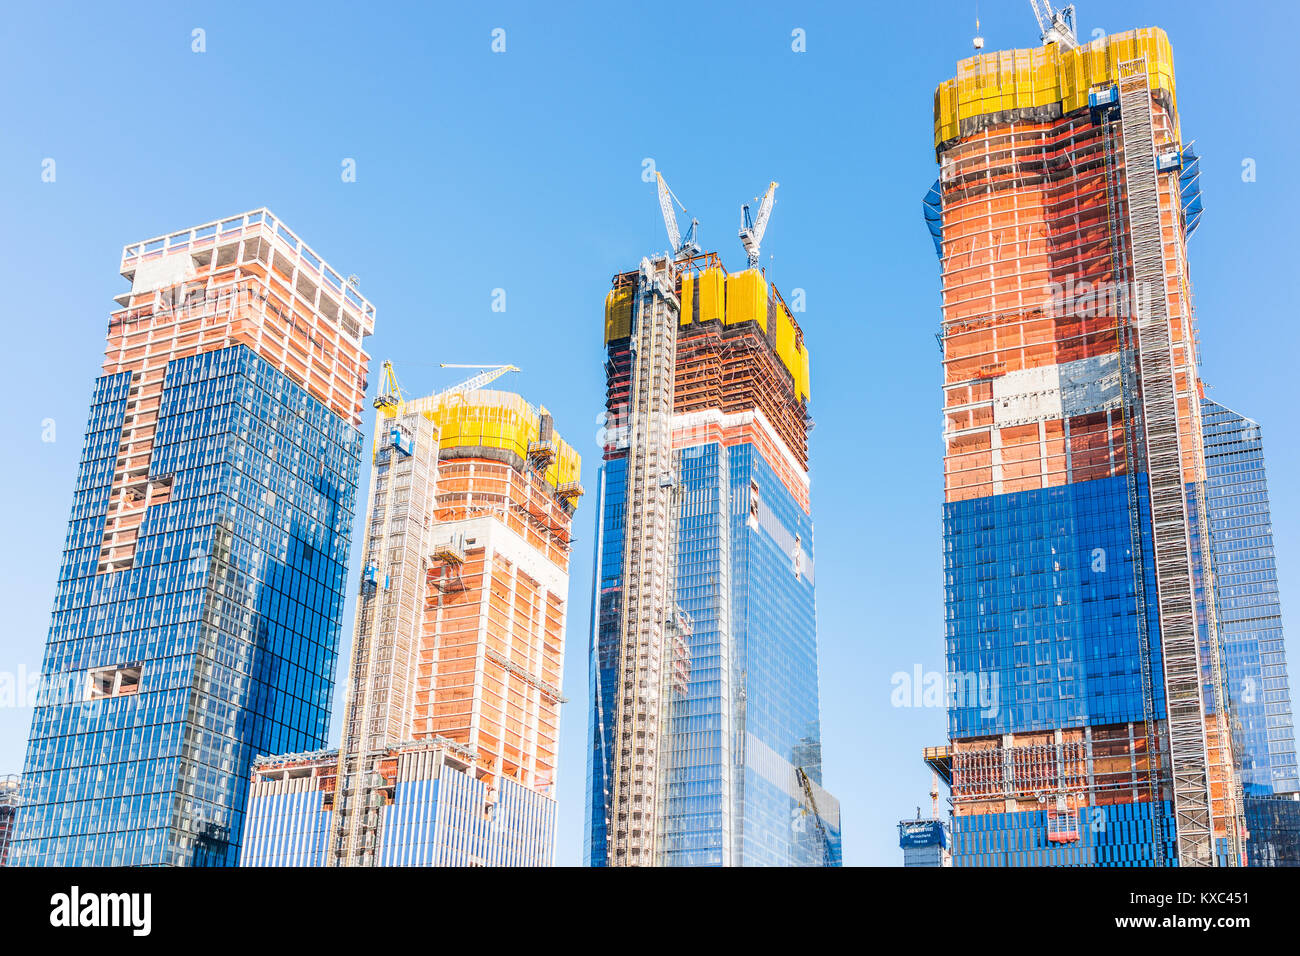 New York City, USA - October 27, 2017: Construction development at the Hudson Yards in Manhattan, NYC, on Chelsea West Side of residential apartments, Stock Photo